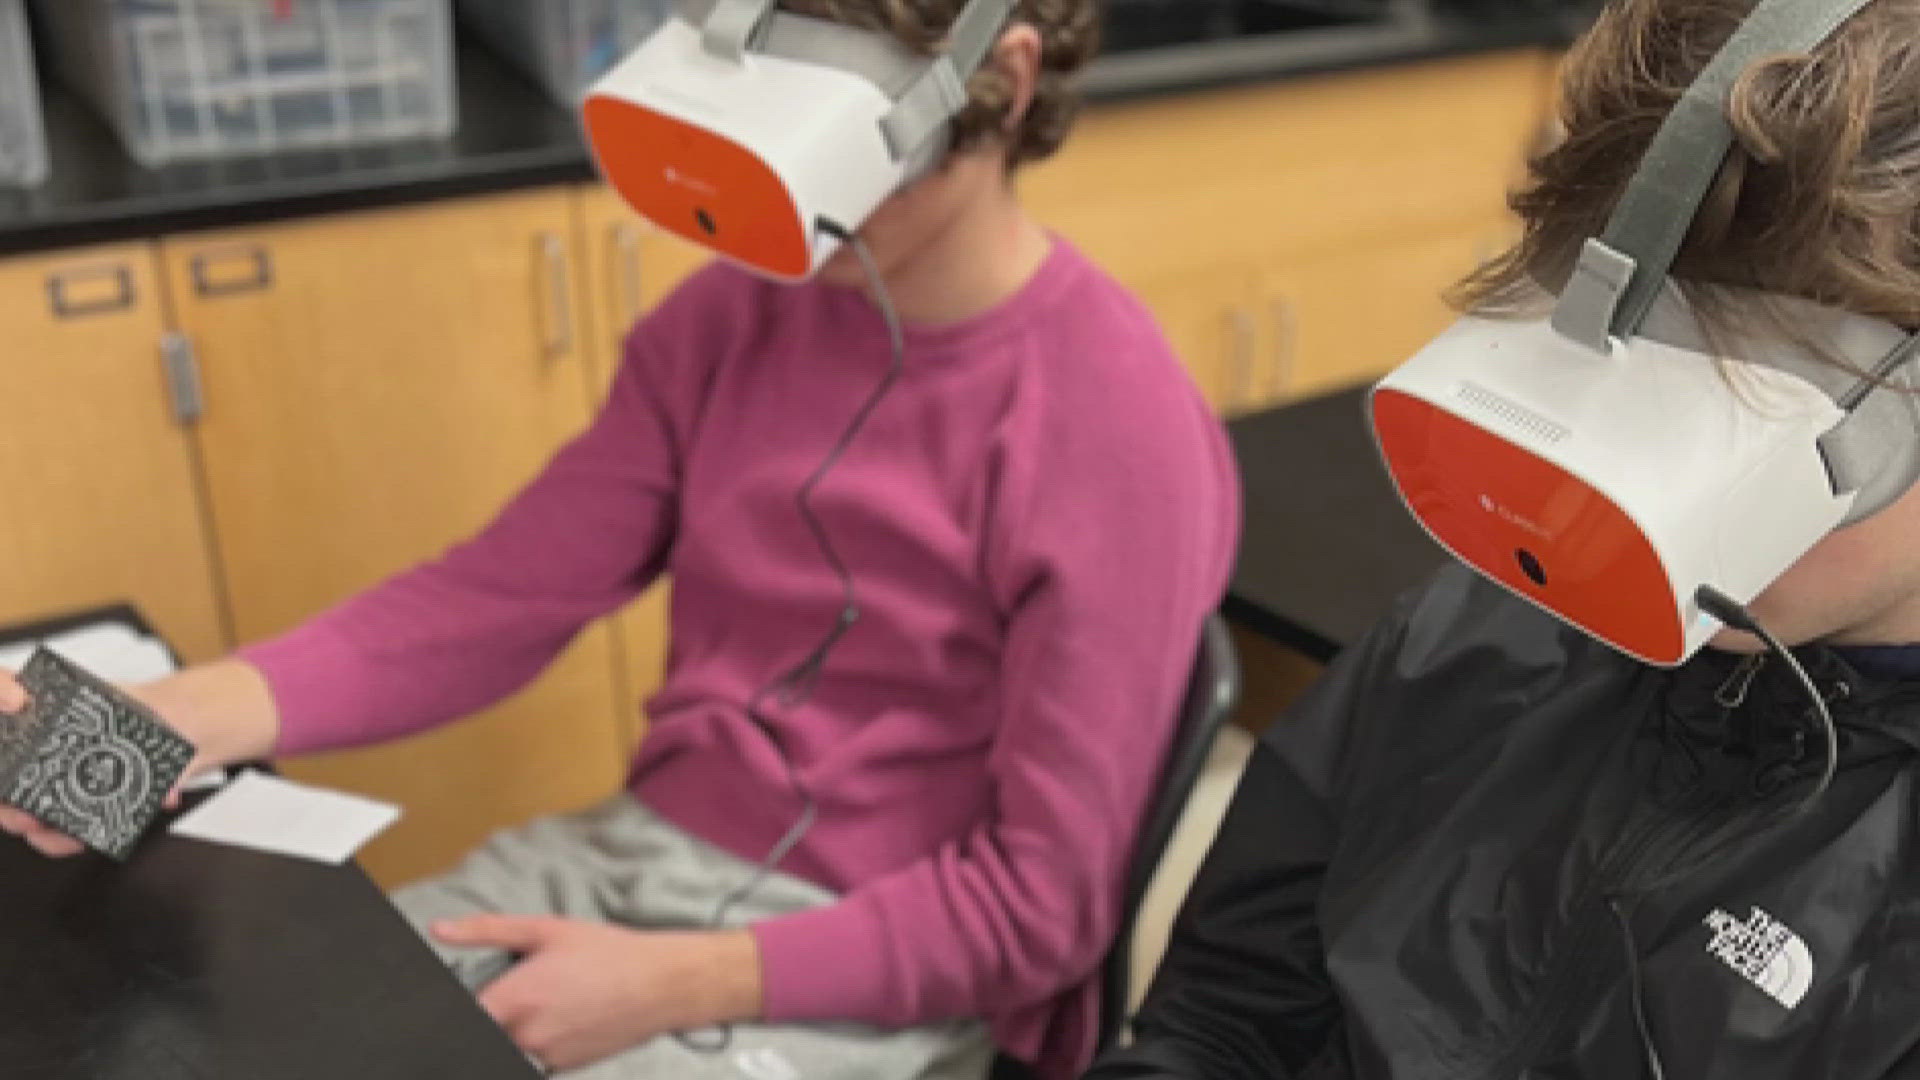 Virtual reality programs help students get interested in the material, and educators are finding creative ways to use them in a variety of classes.